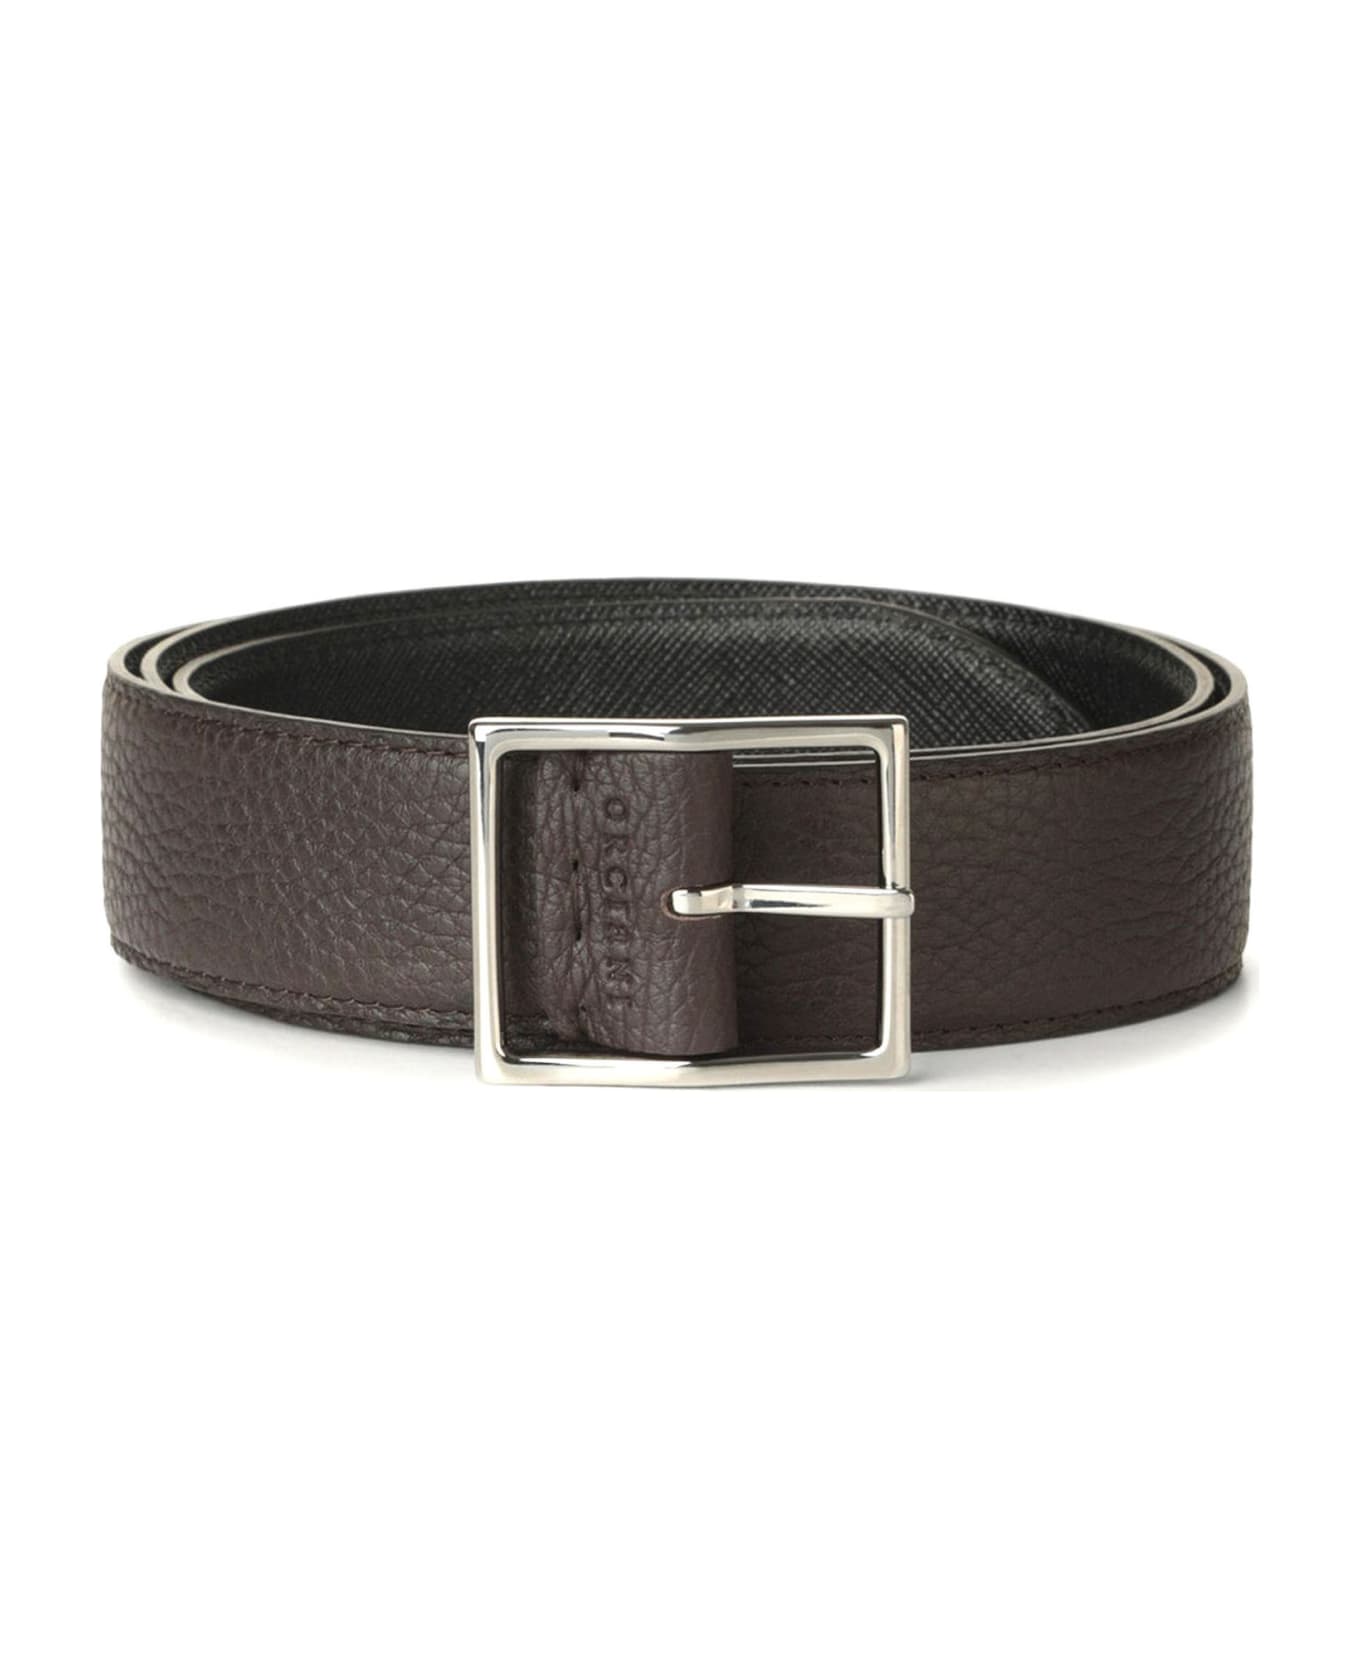 Orciani Brown Hammered Leather Belt - Bicolored